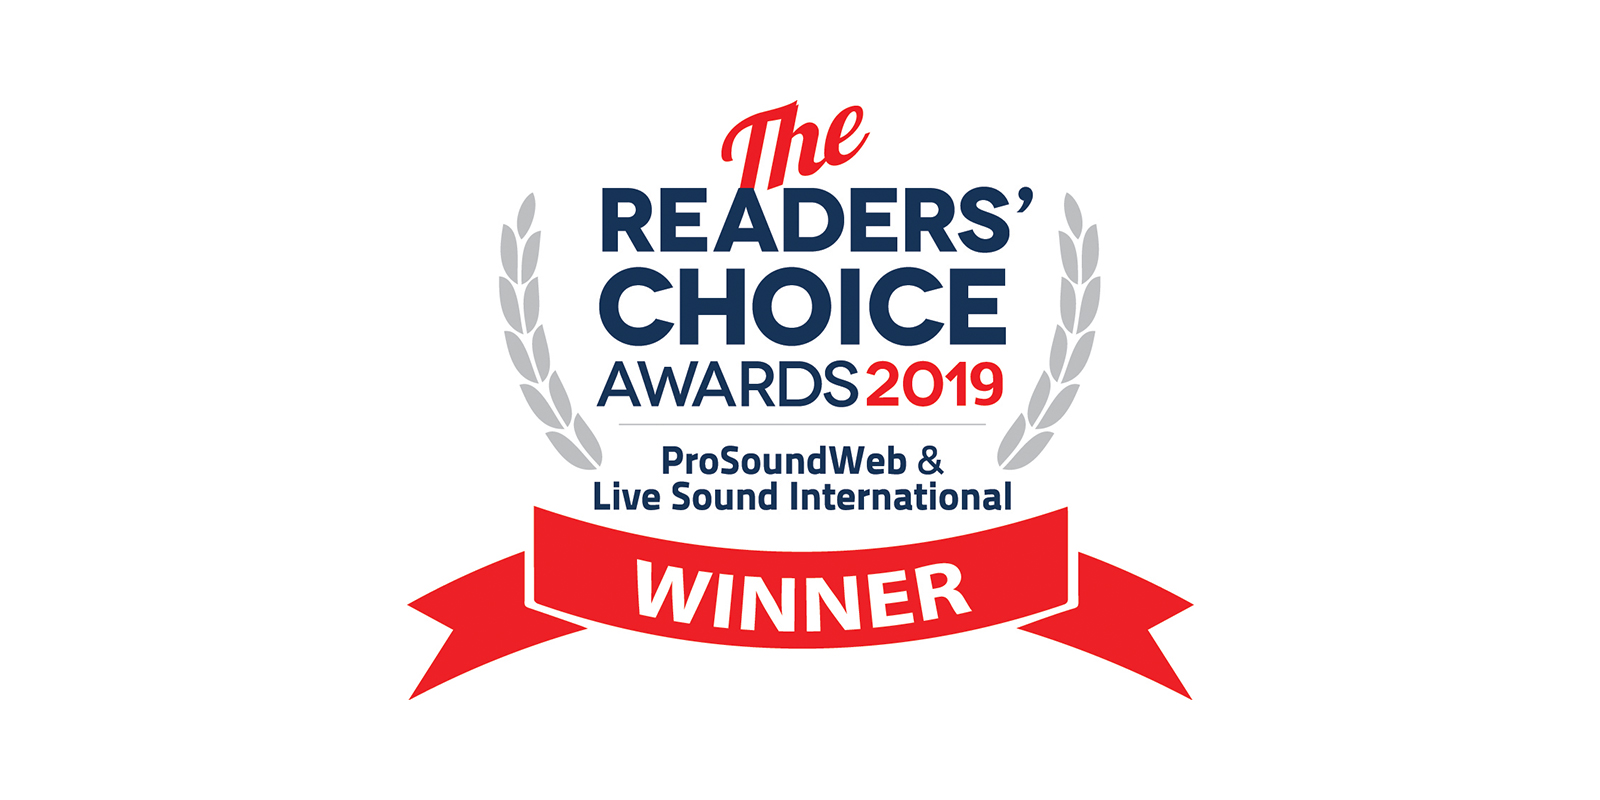 Winner of the ProSound Readers’ Choice Award 2019 for Professional Sound System